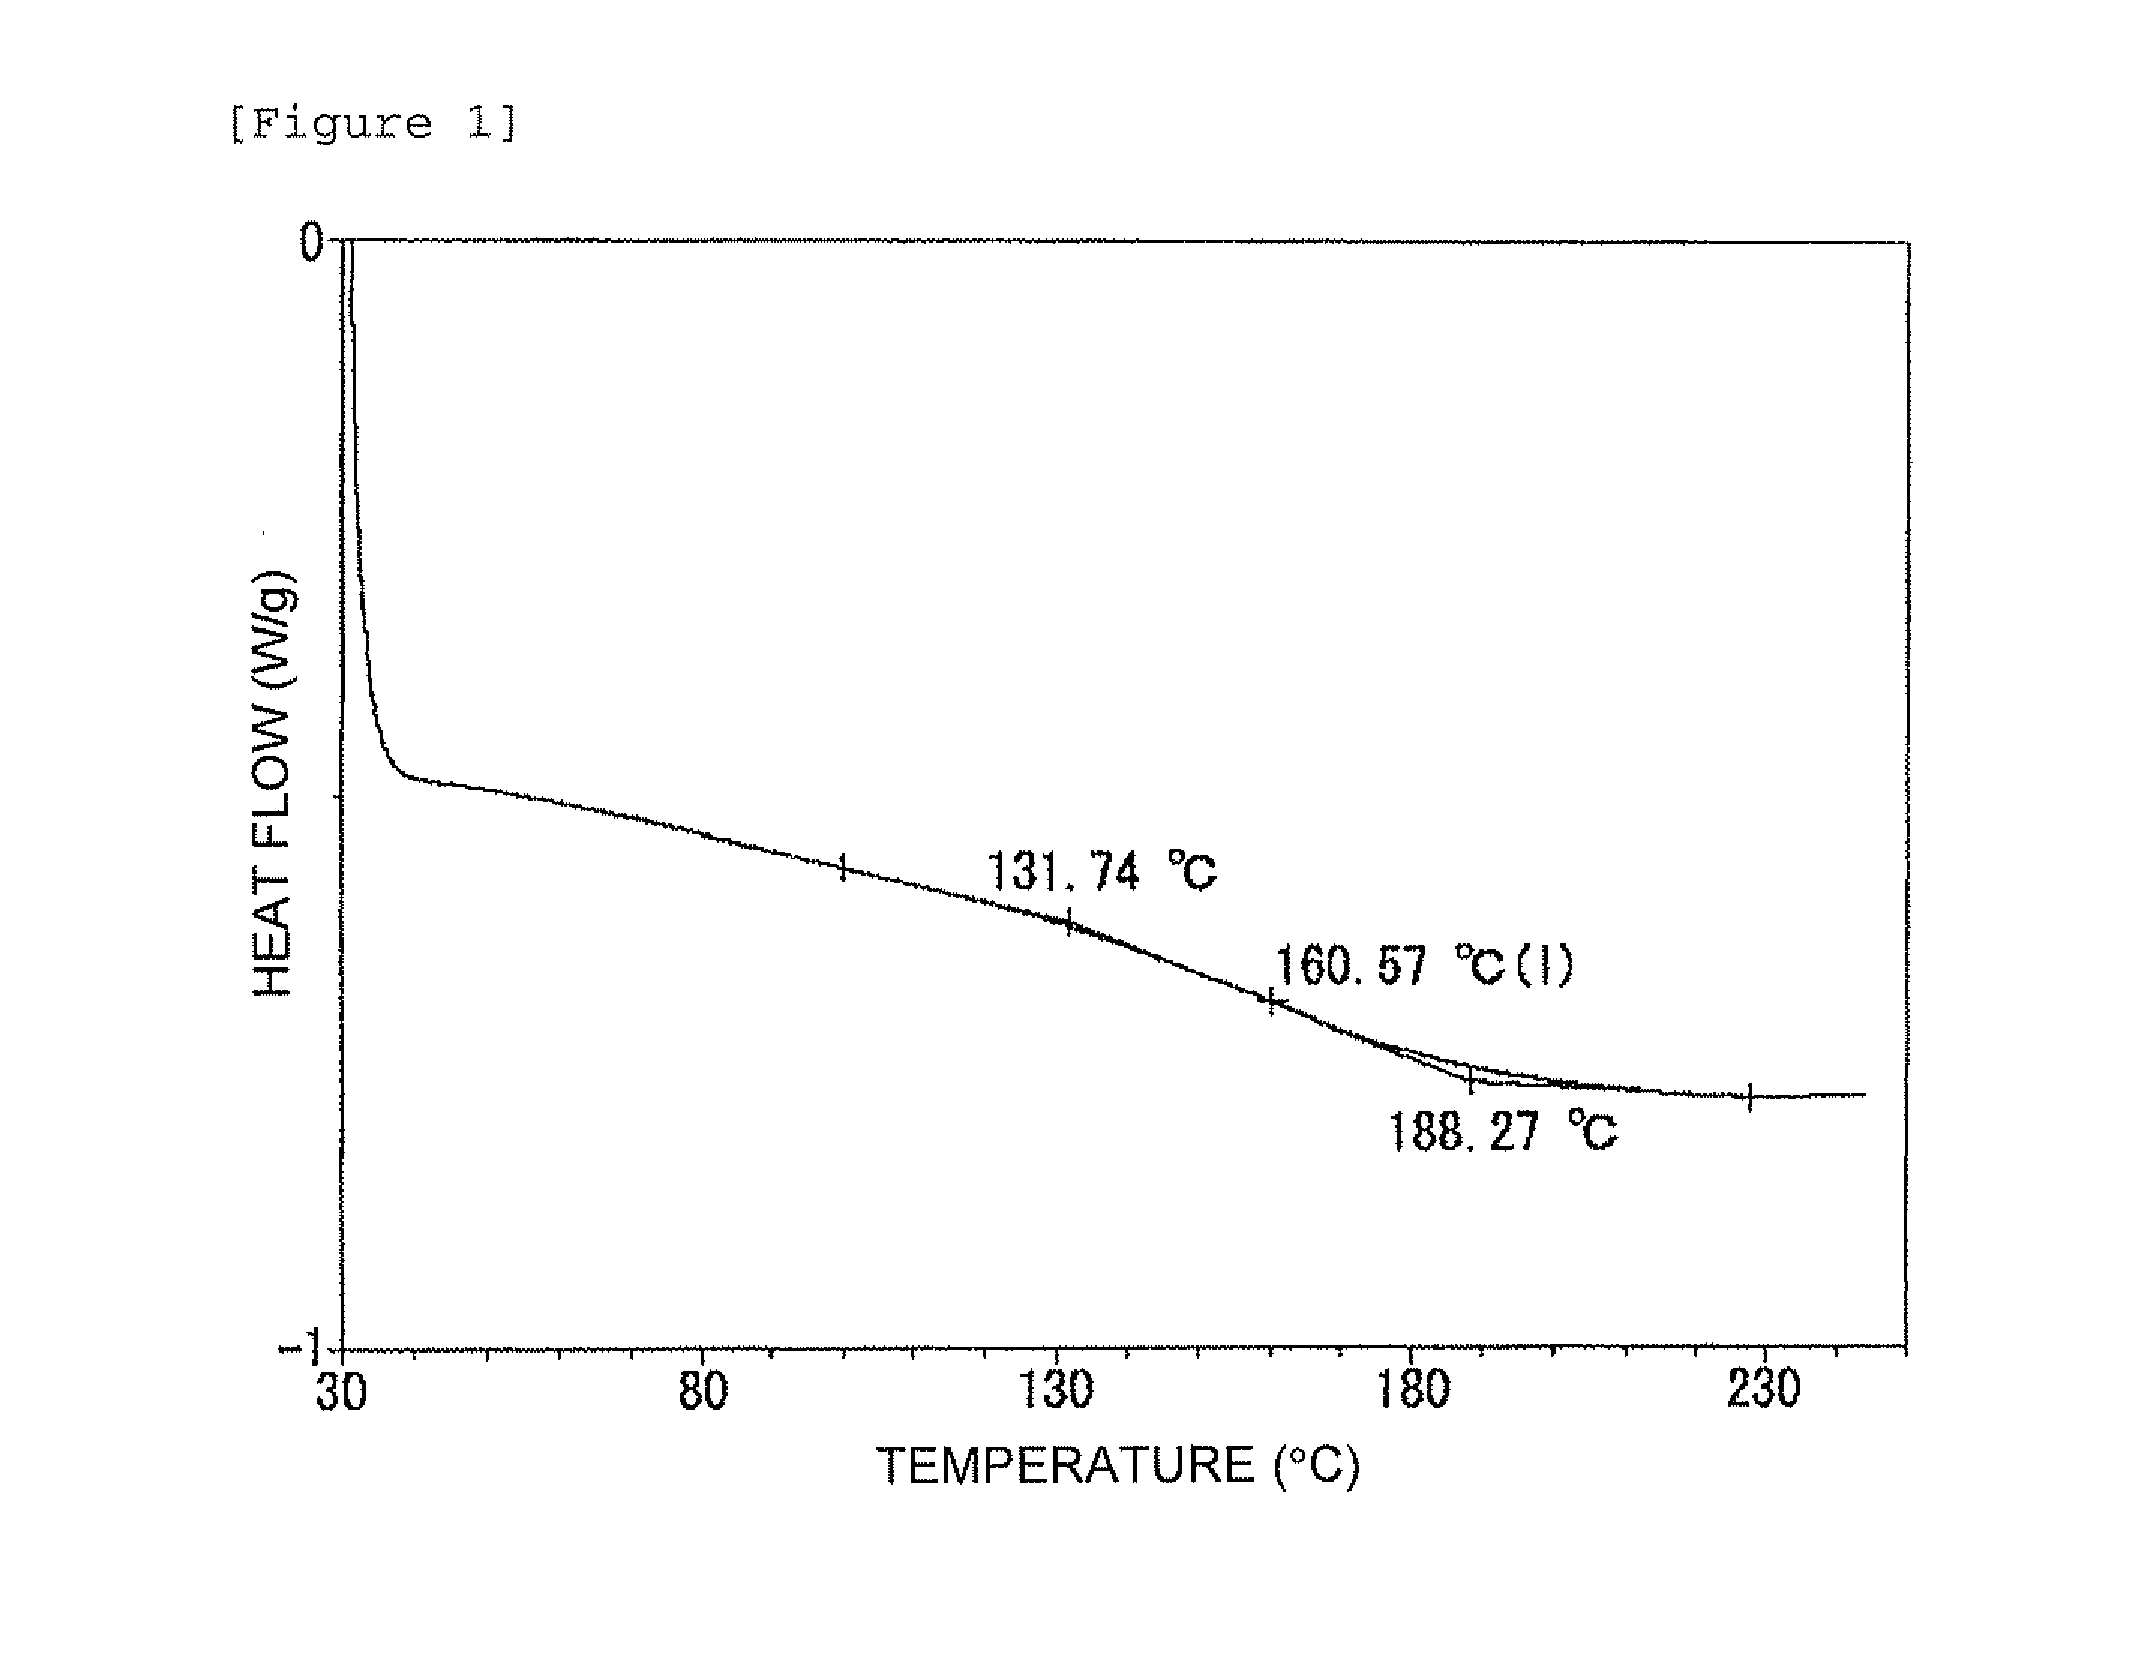 Composition for formation of cured epoxy resin, and cured products thereof